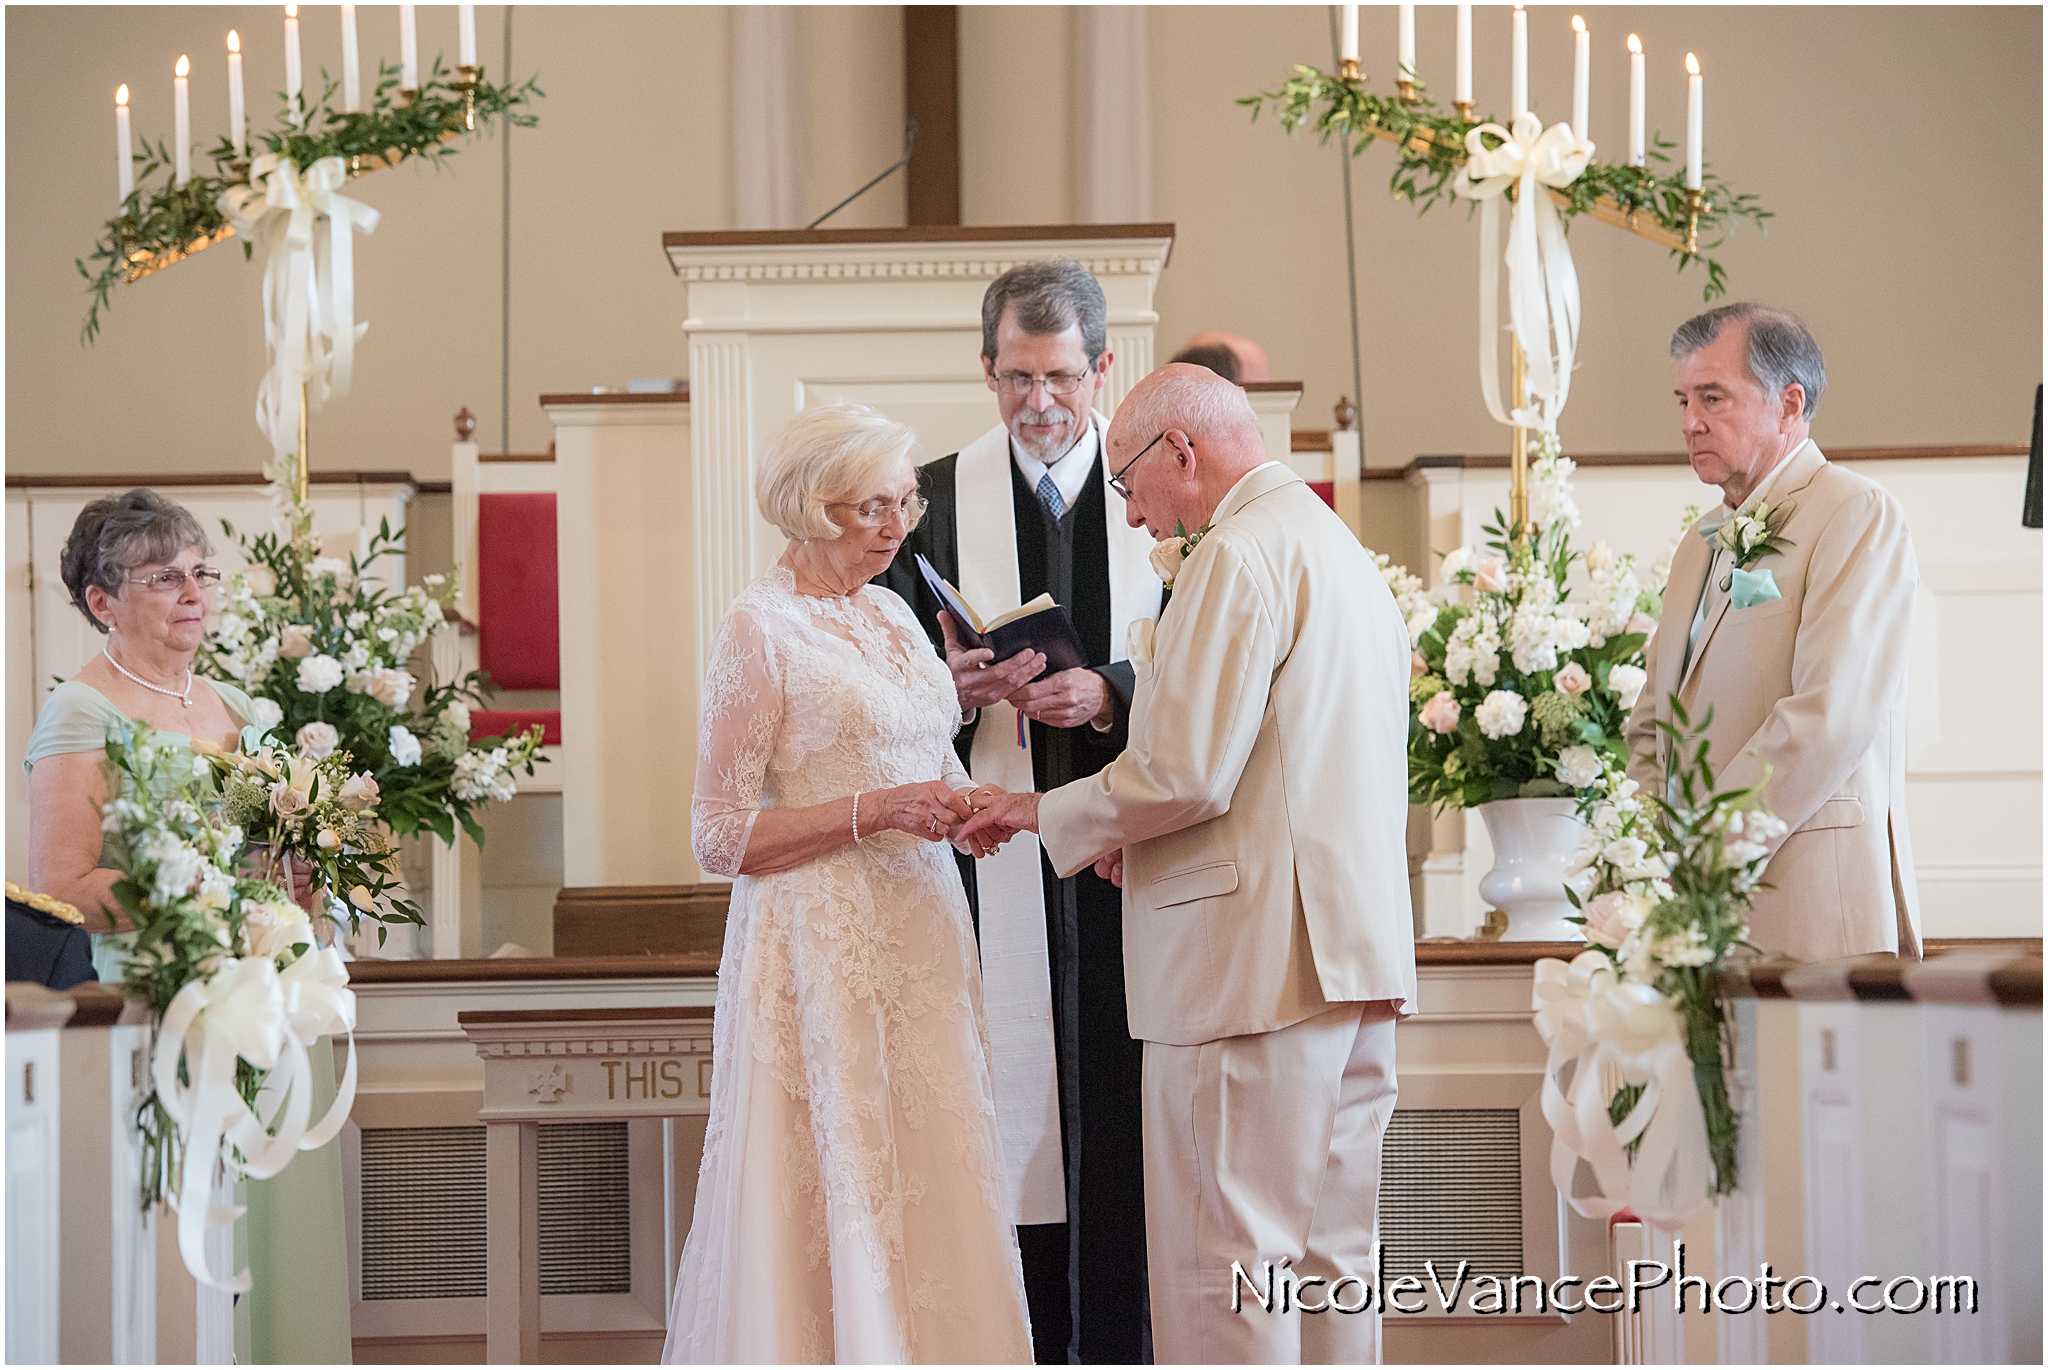 Ring exchange during the wedding ceremony at Crestwood Presbyterian Church in Richmond VA